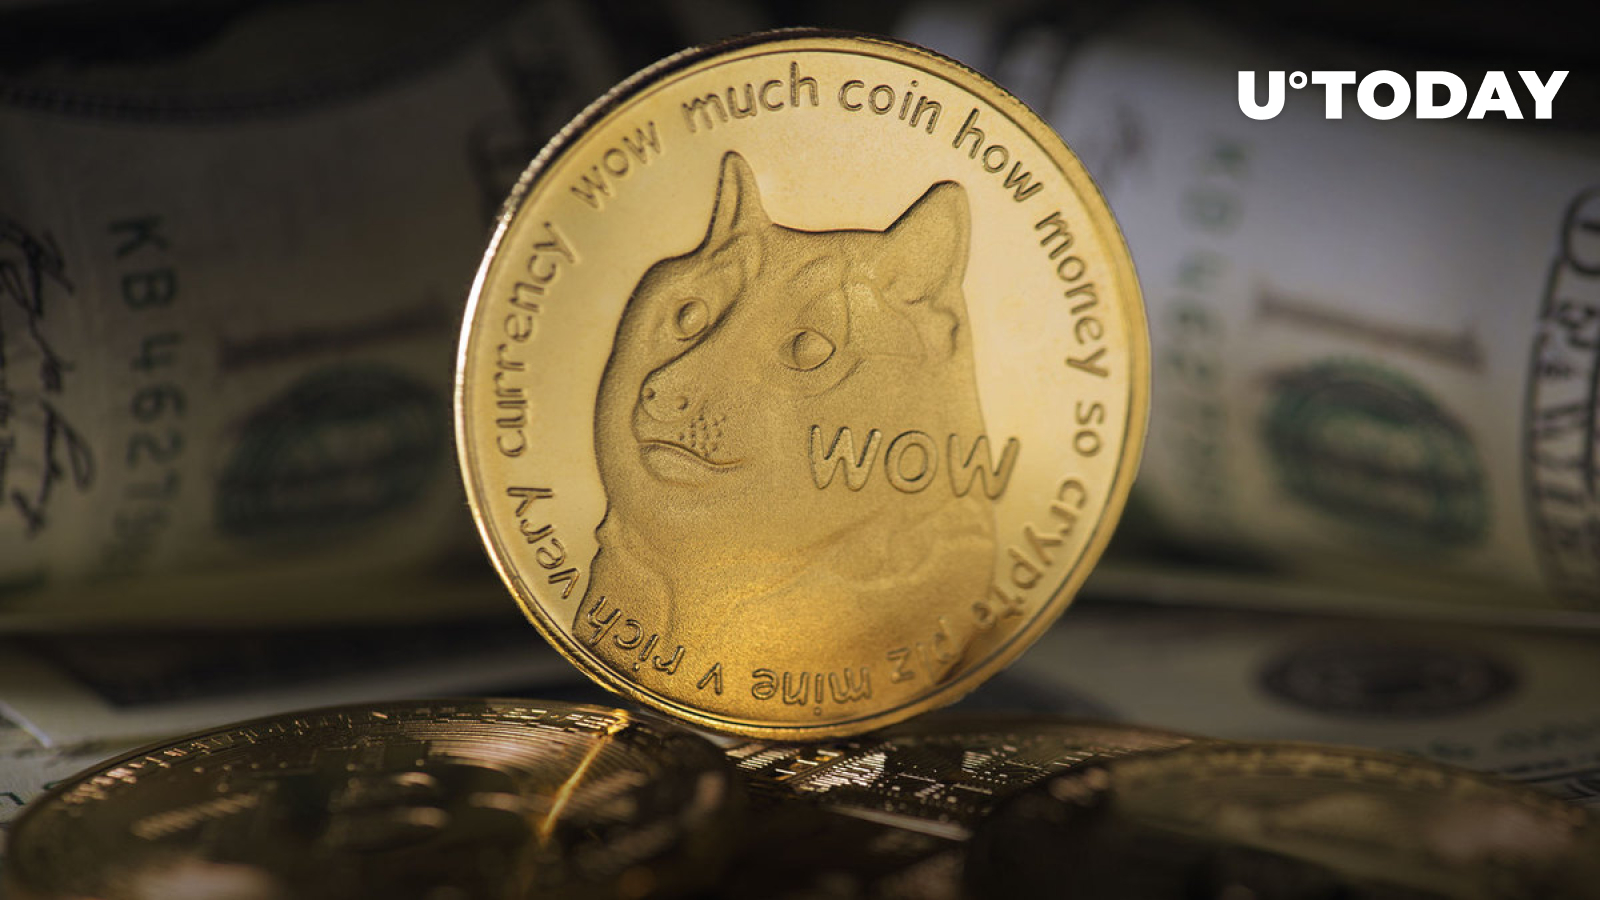 dogecoin-creator-i-made-usd90-billion-in-cryptocurrency-in-few-hours